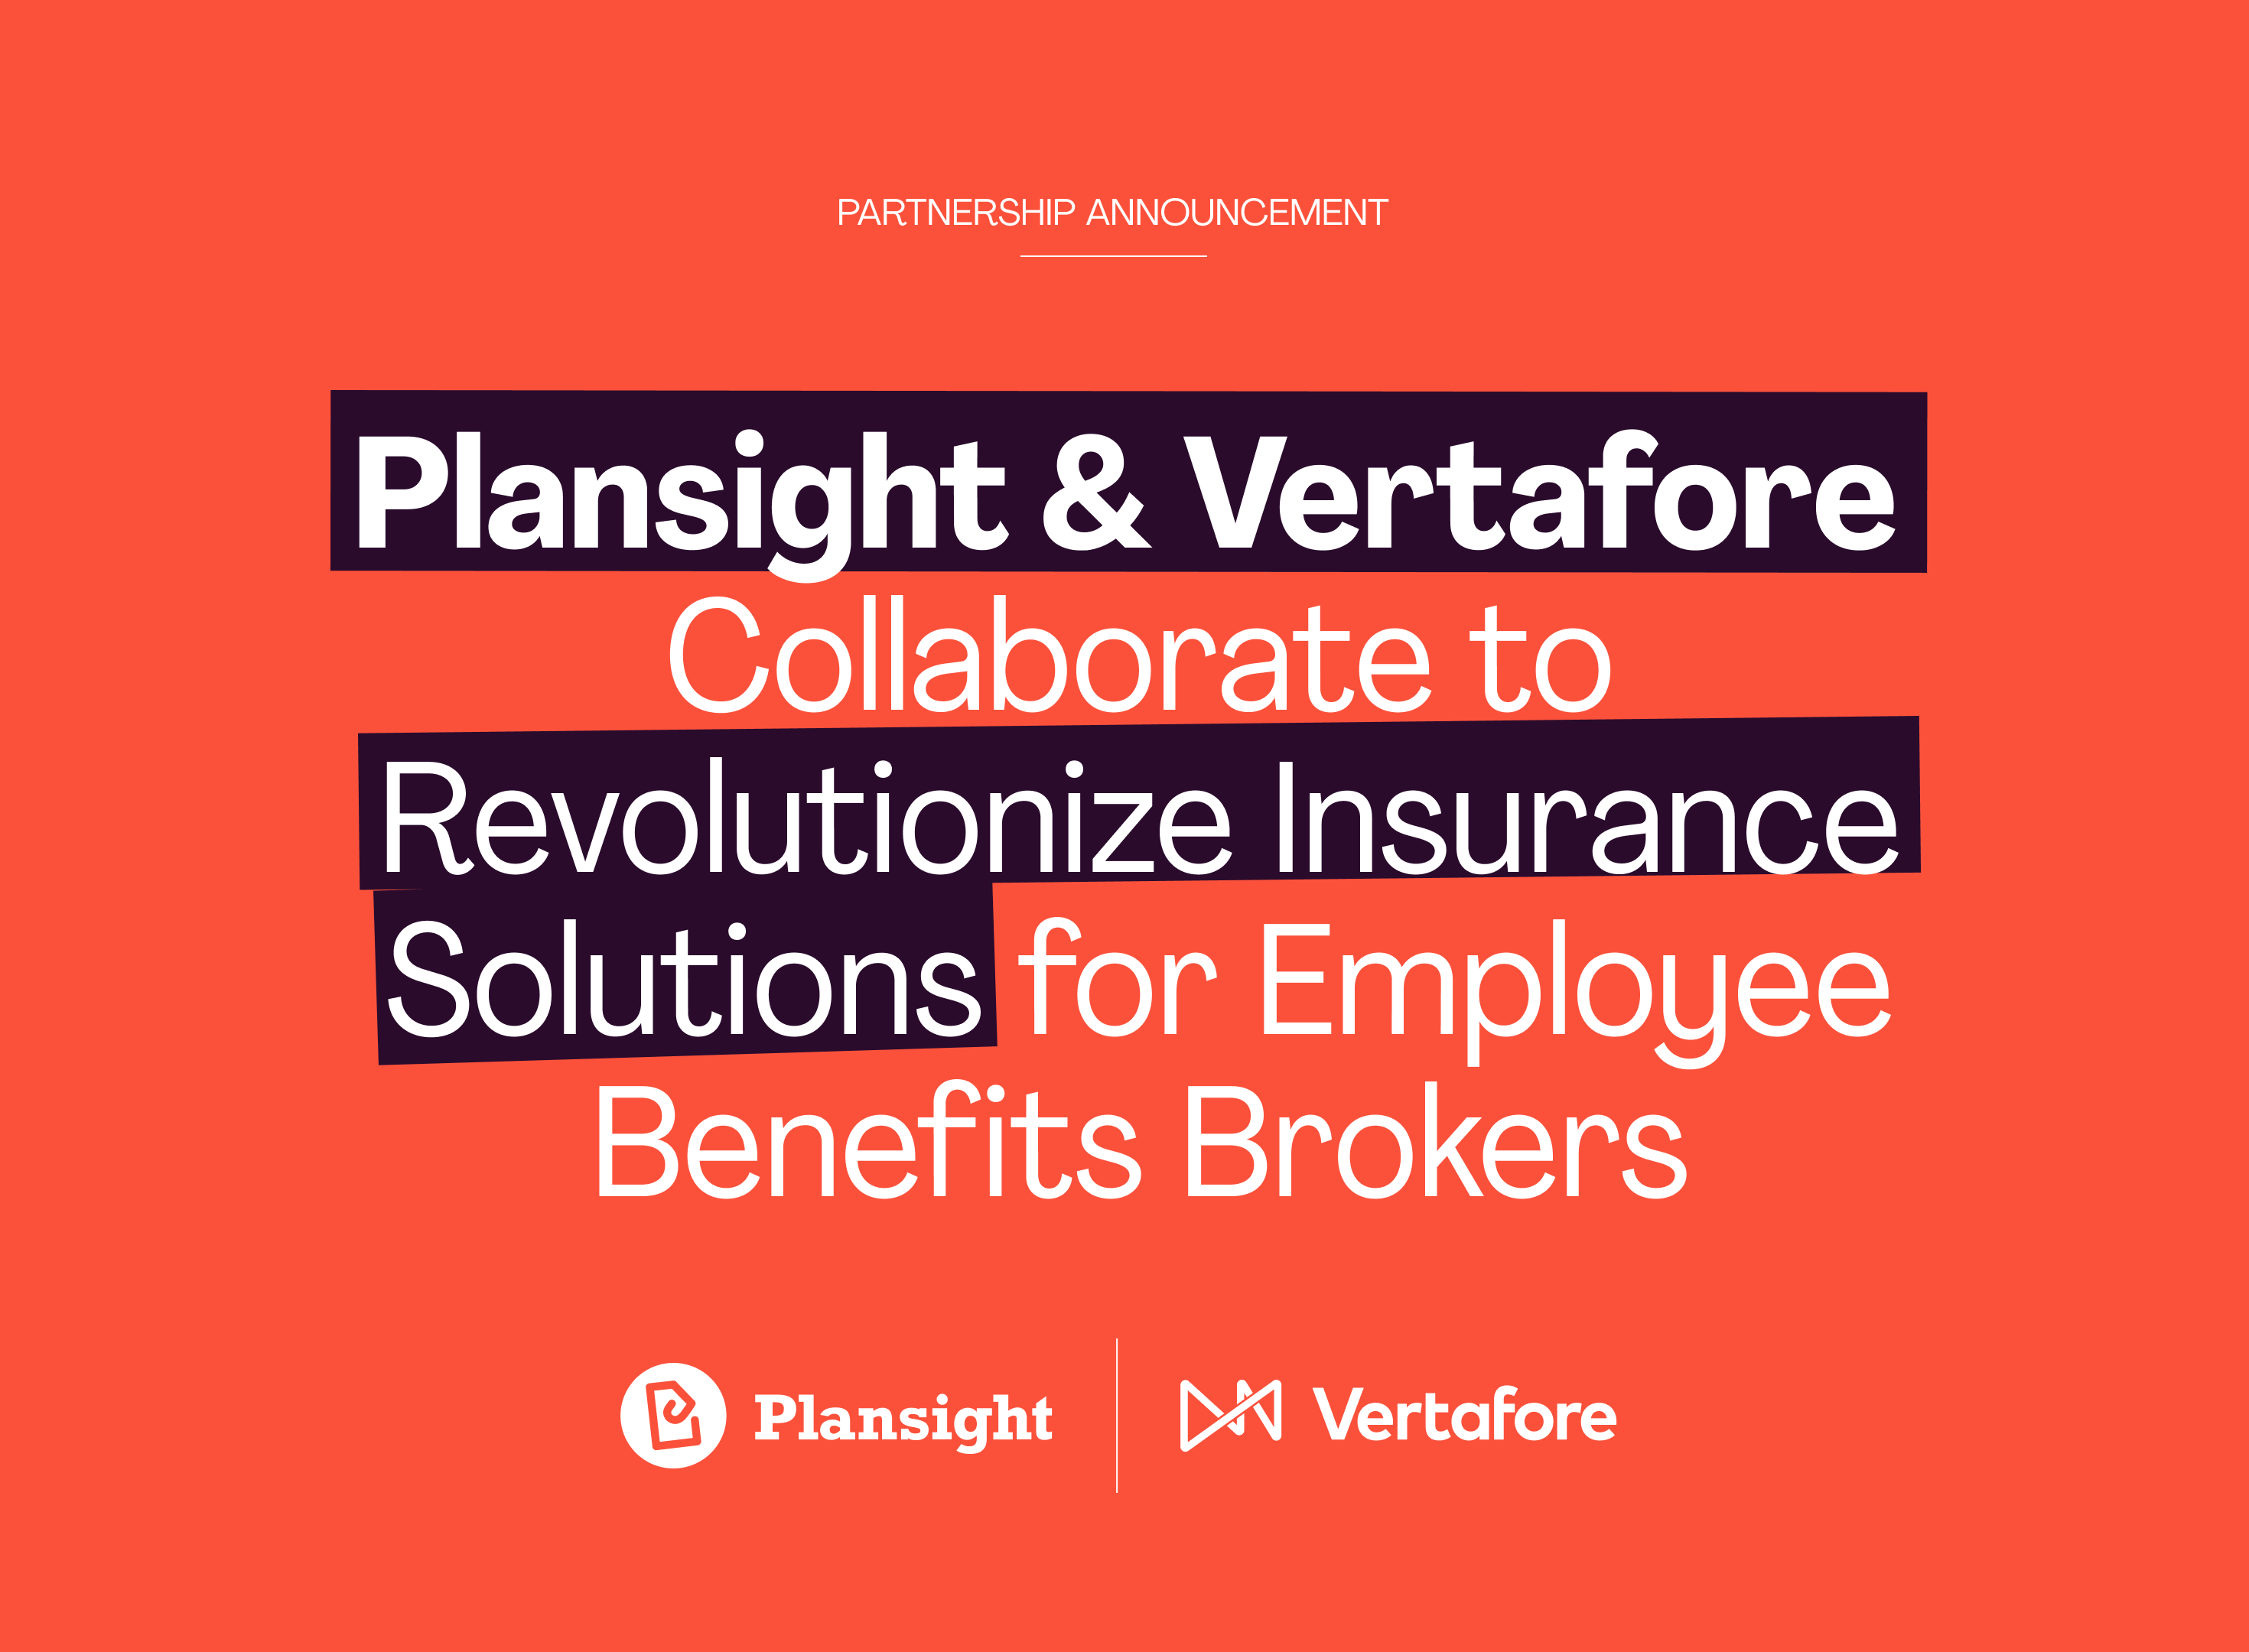 Plansight Inc. and Vertafore Collaborate to Revolutionize Insurance Solutions for Employee Benefits Brokers